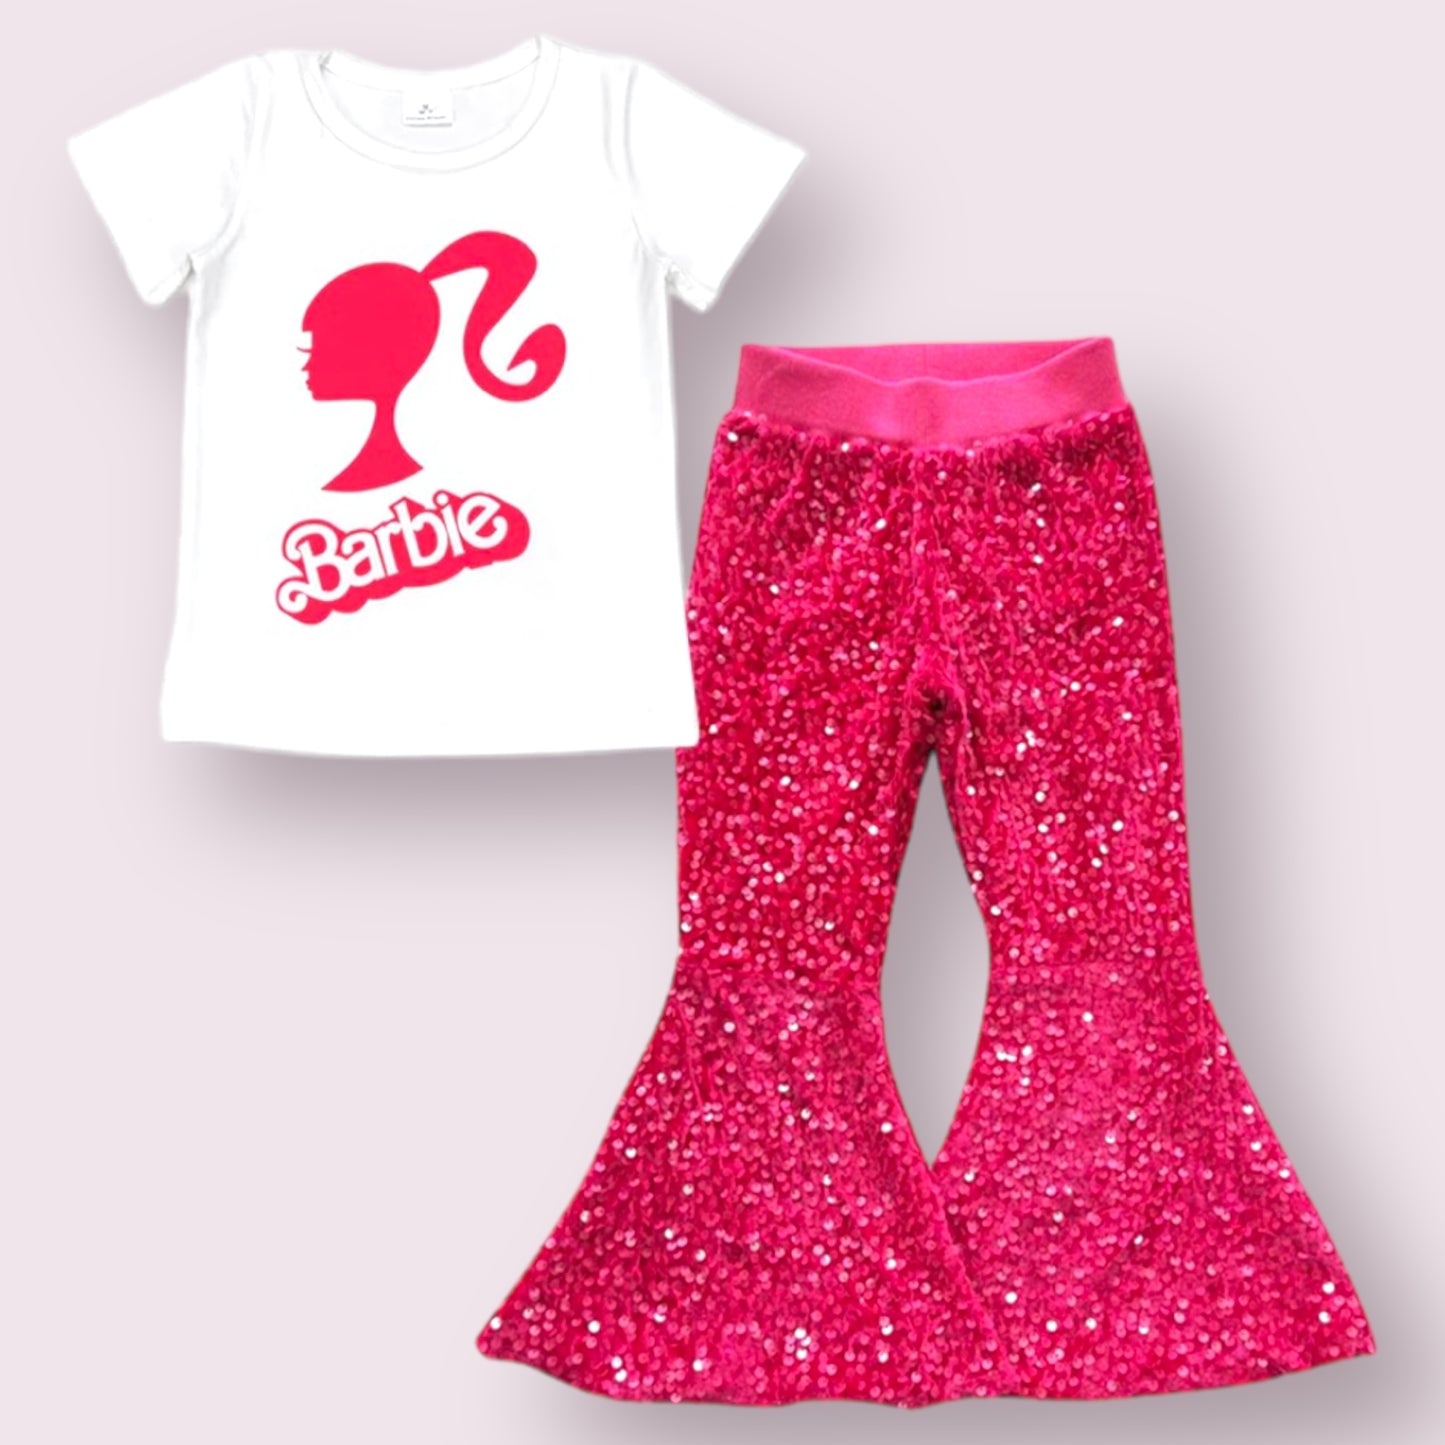 Barbie Top and Sequin Pants